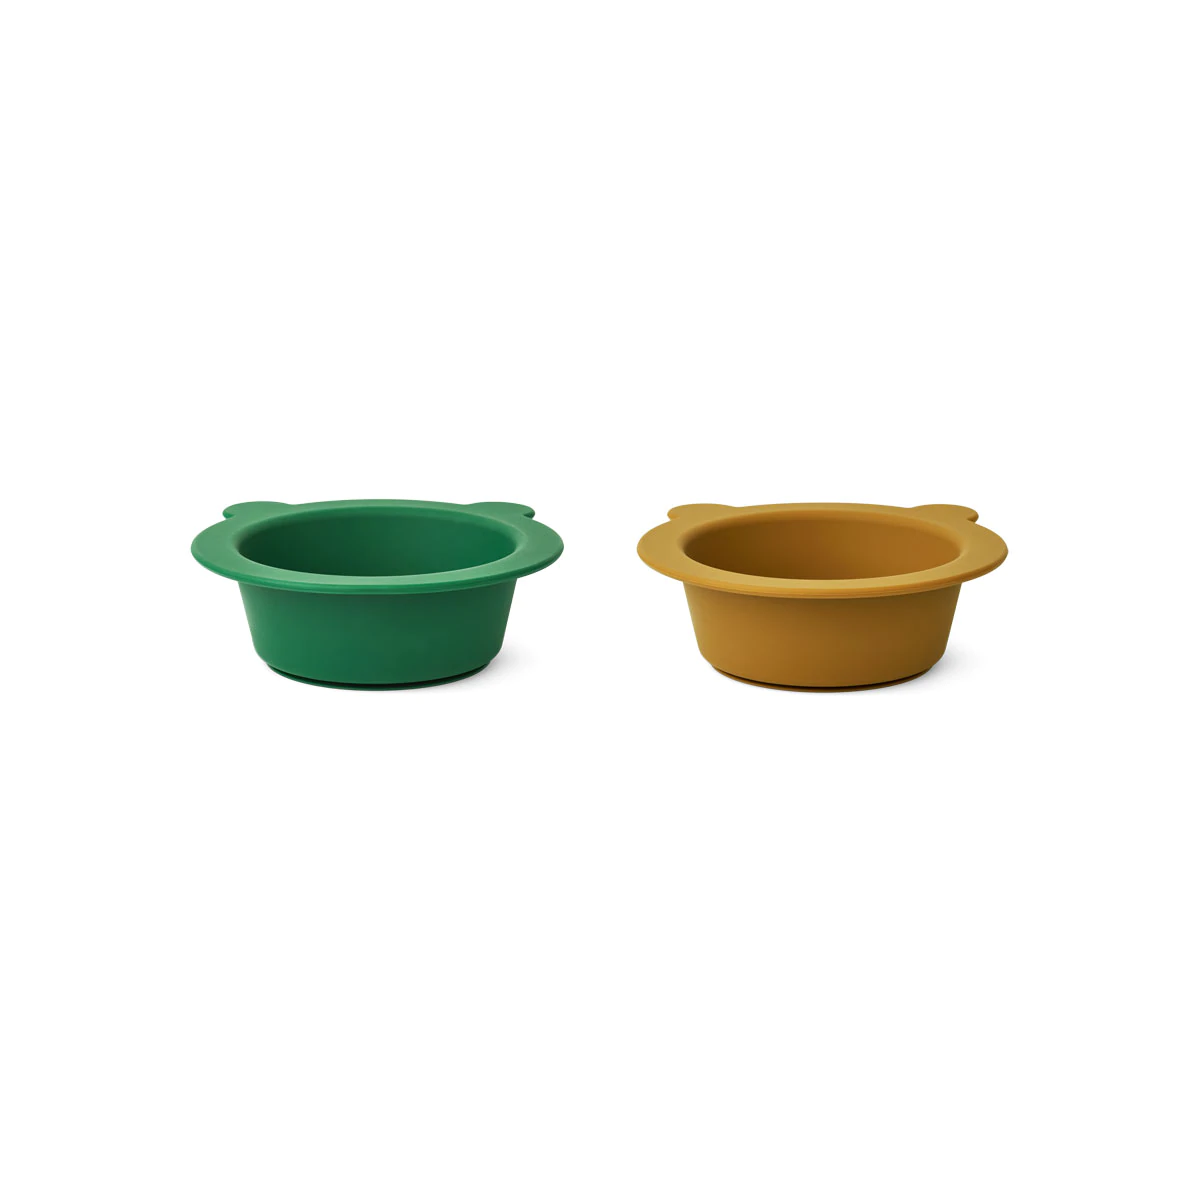 Liewood, Peony silicone suction bowl set of 2, Eden golden caramel 